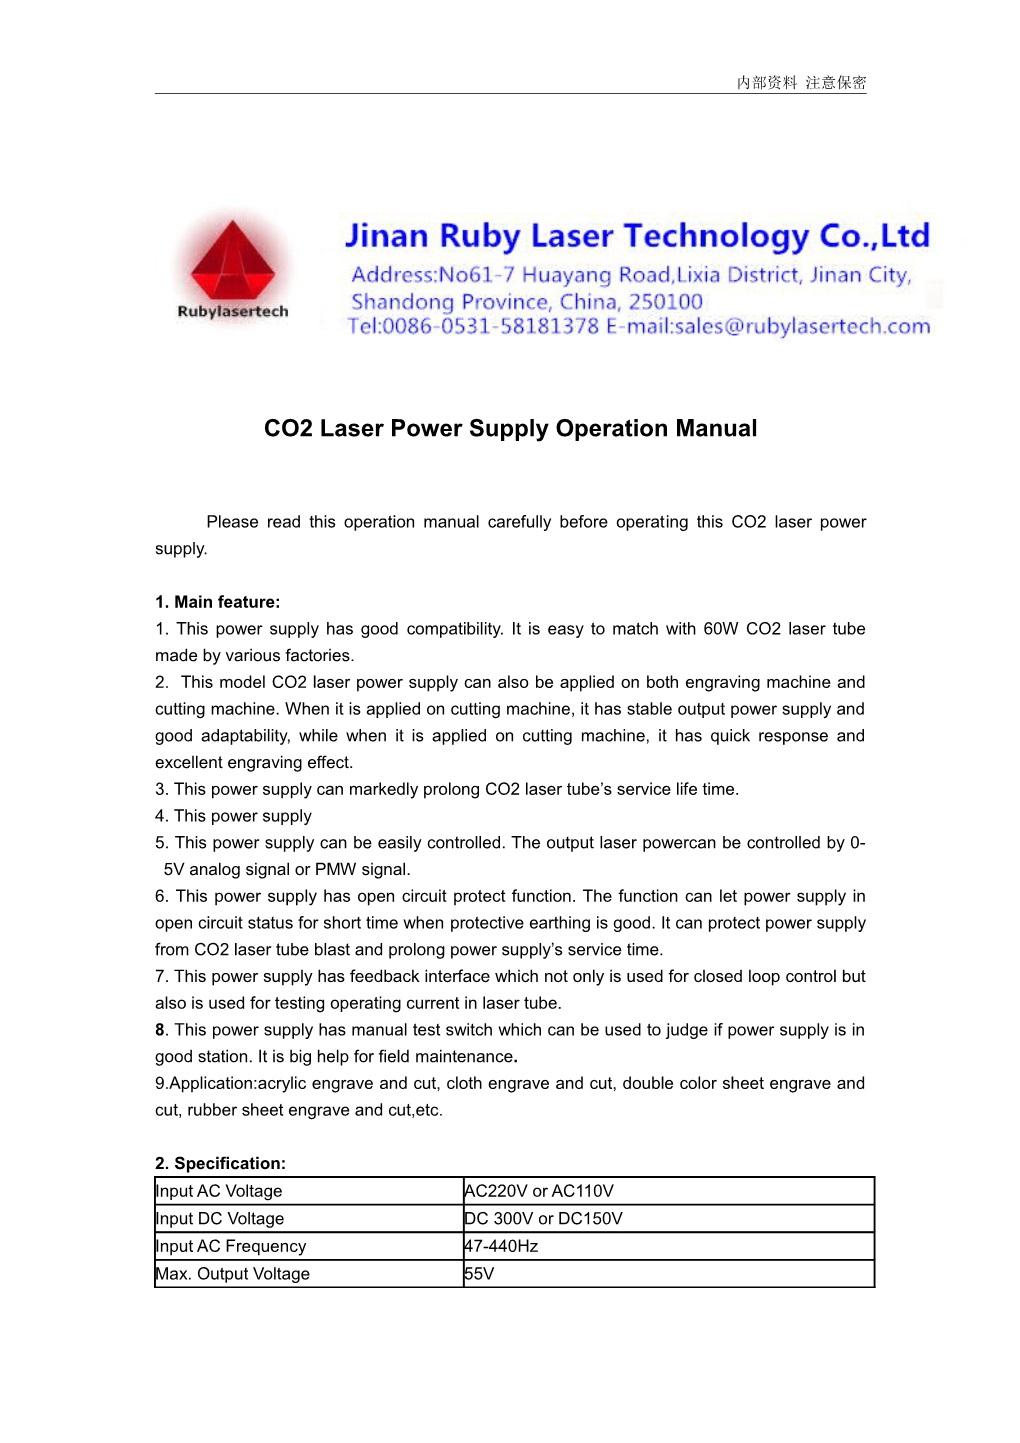 60W CO2 Laser Power Supply Operation Manual